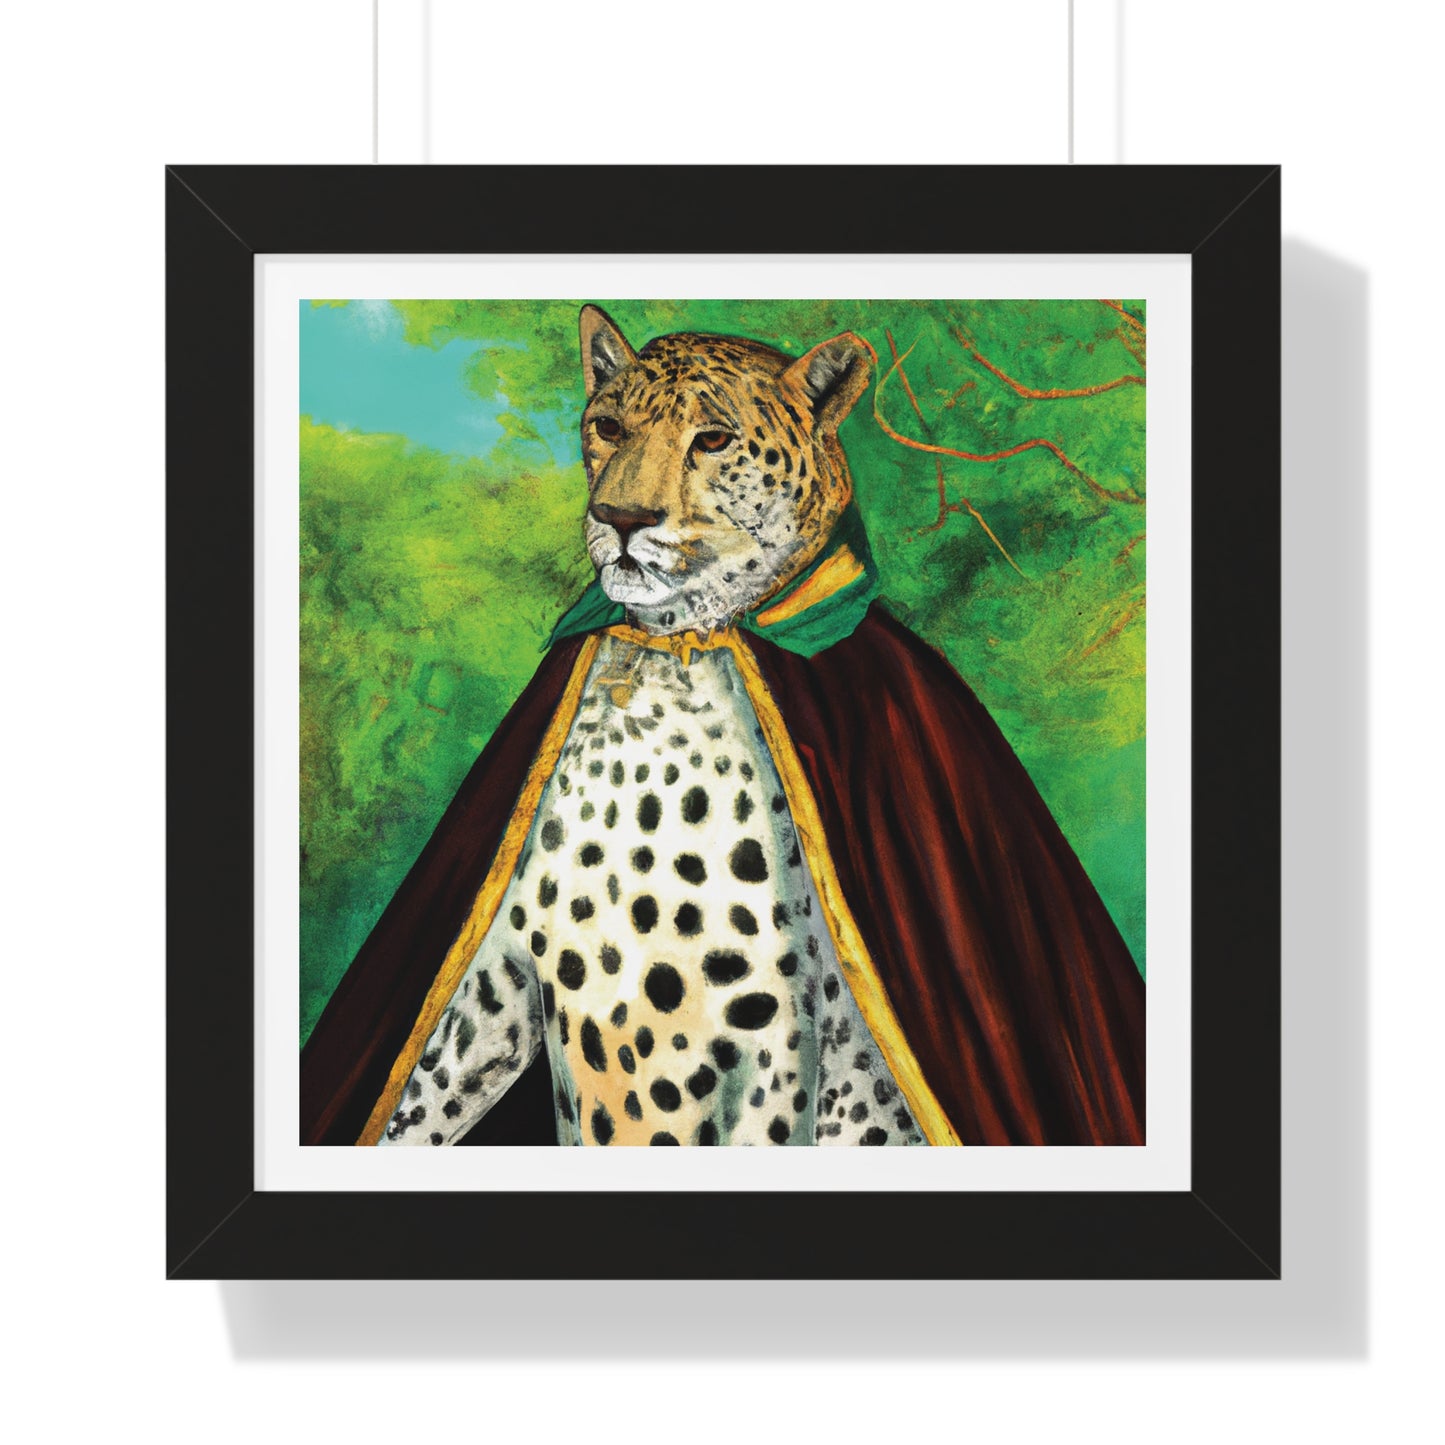 This document introduces the Royal Leopard in Red Robe Framed Poster Wall Art, a captivating piece of decor that combines regality with artistic flair. 